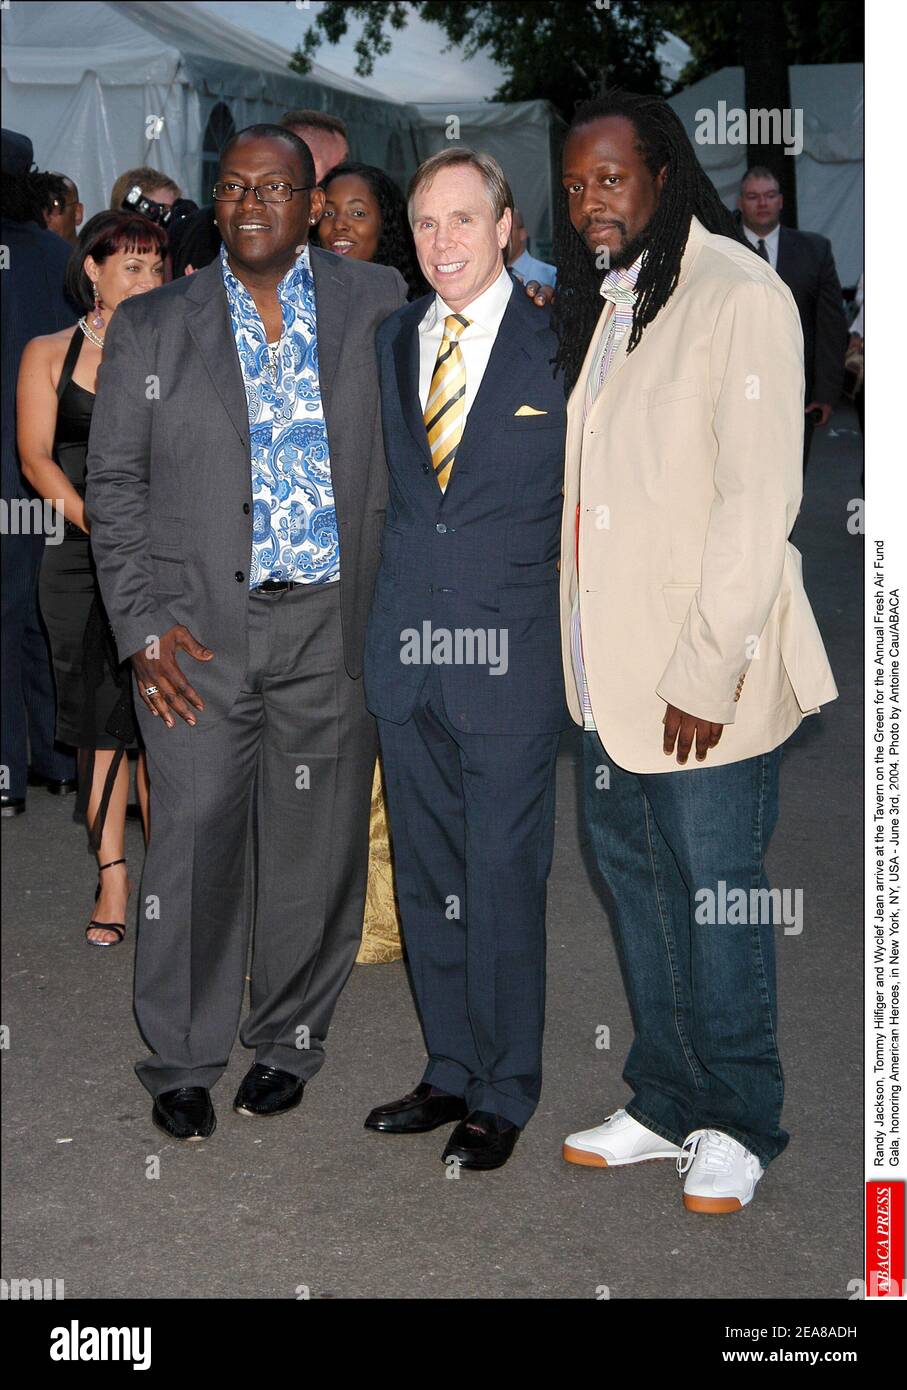 Randy Jackson, Tommy Hilfiger and Wyclef Jean arrive at the Tavern on the  Green for the Annual Fresh Air Fund Gala, honoring American Heroes, in New  York, NY, USA - June 3rd,